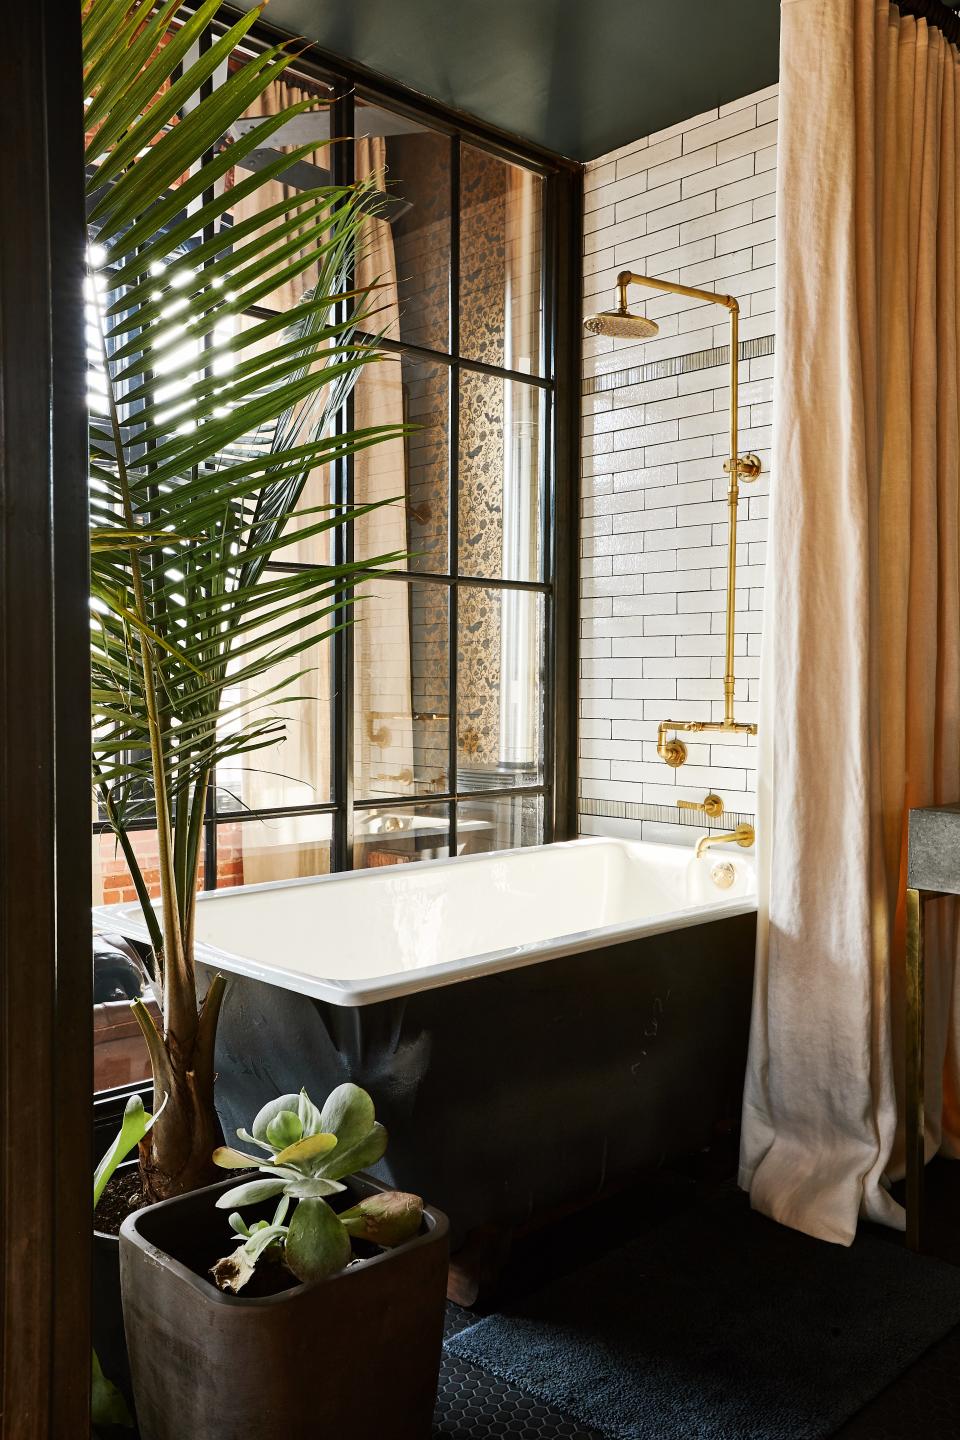 "I started really responding to the idea of having a bathroom that was basically a glass box, and it's truly a remarkable piece of craftsmanship," says Brown. The shower wall tiles are from Ann Sacks Savoy Collection; the tub is Kohler's "Tea for 2."